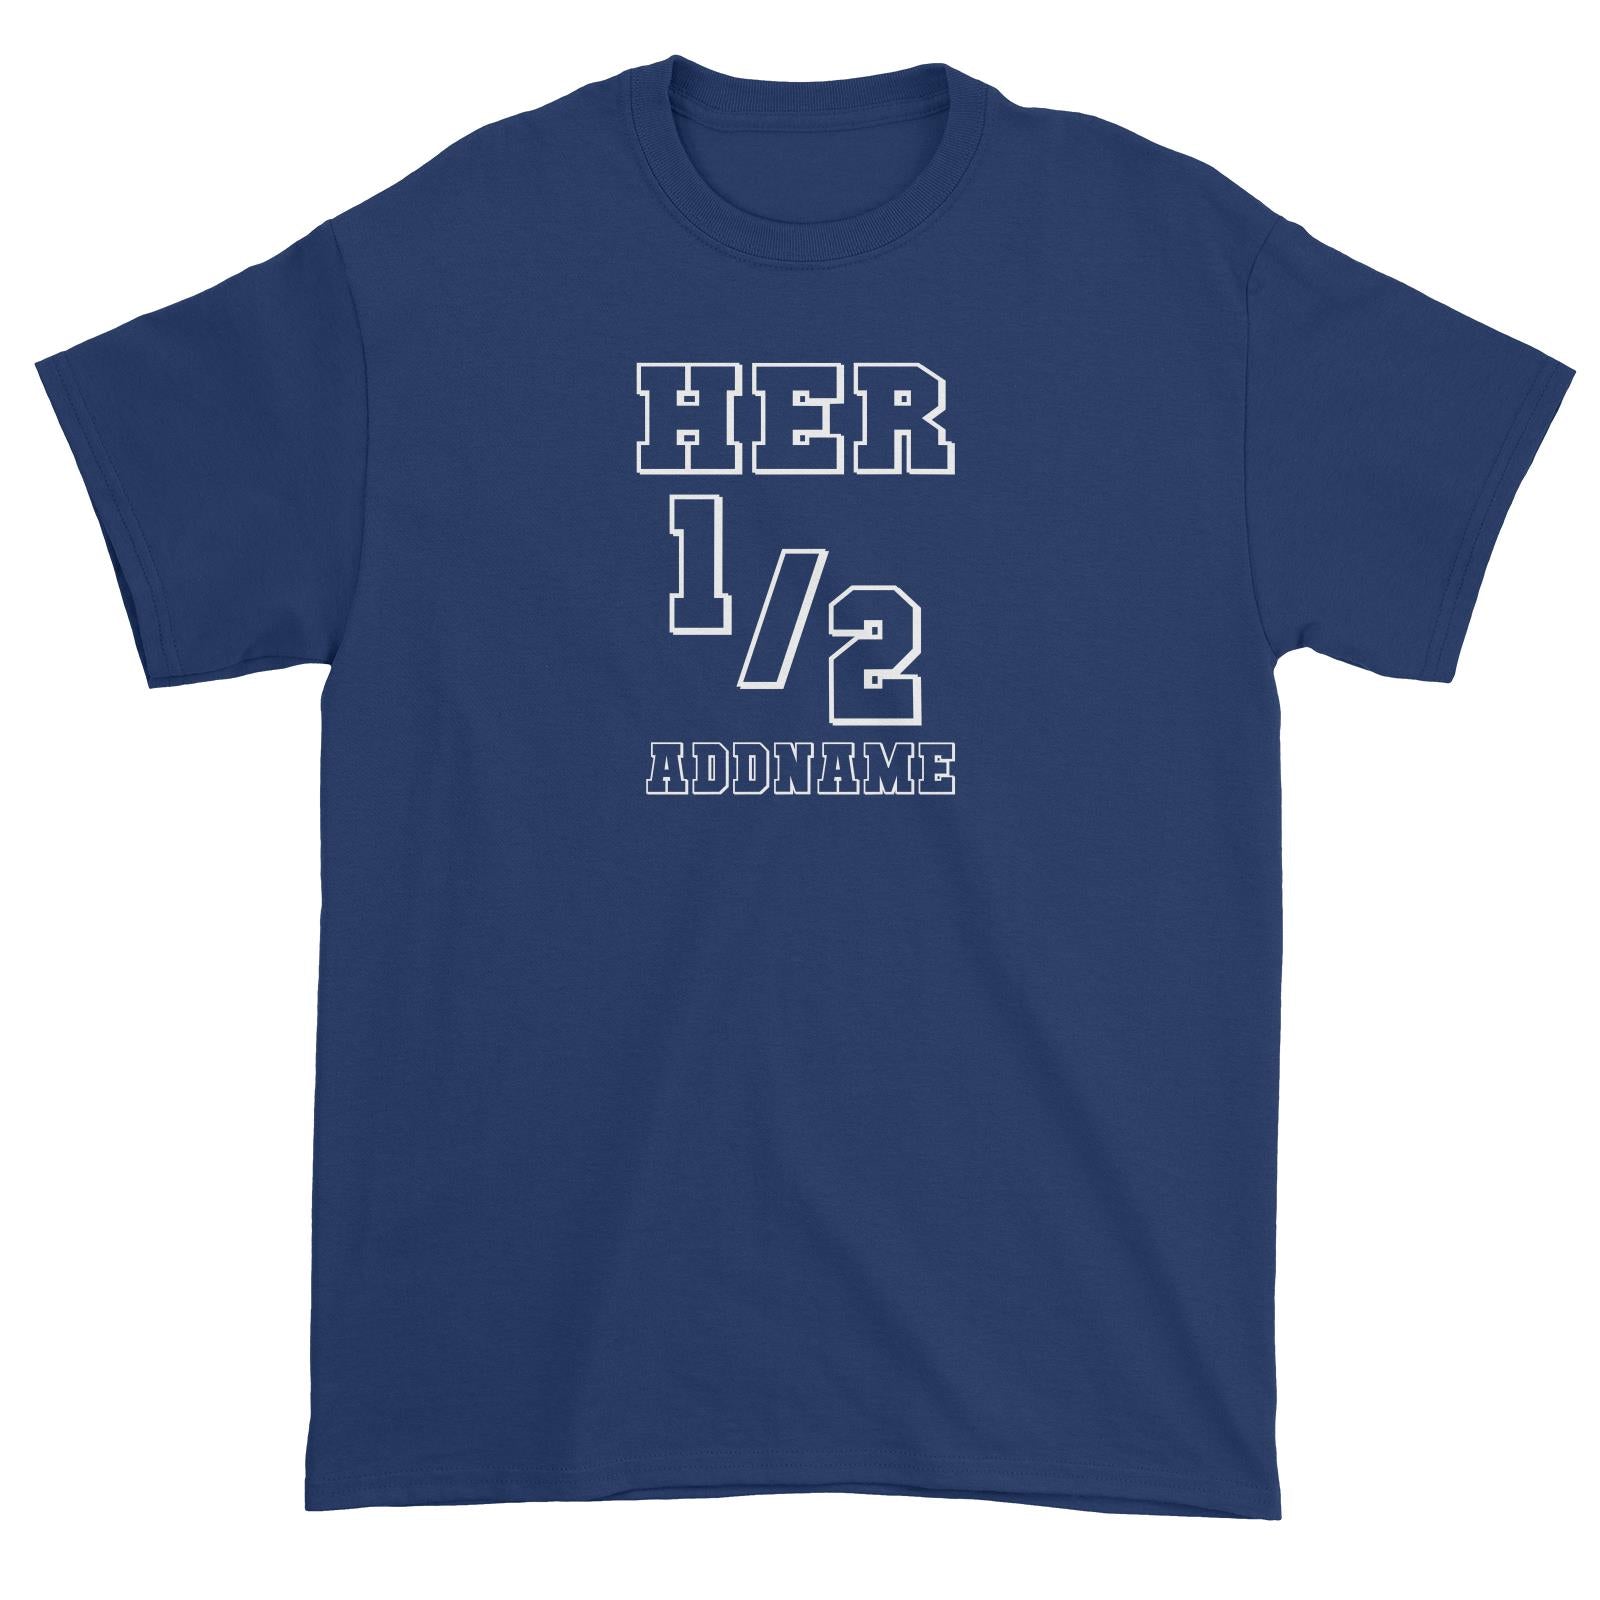 Couple Series Her Half Addname Unisex T-Shirt